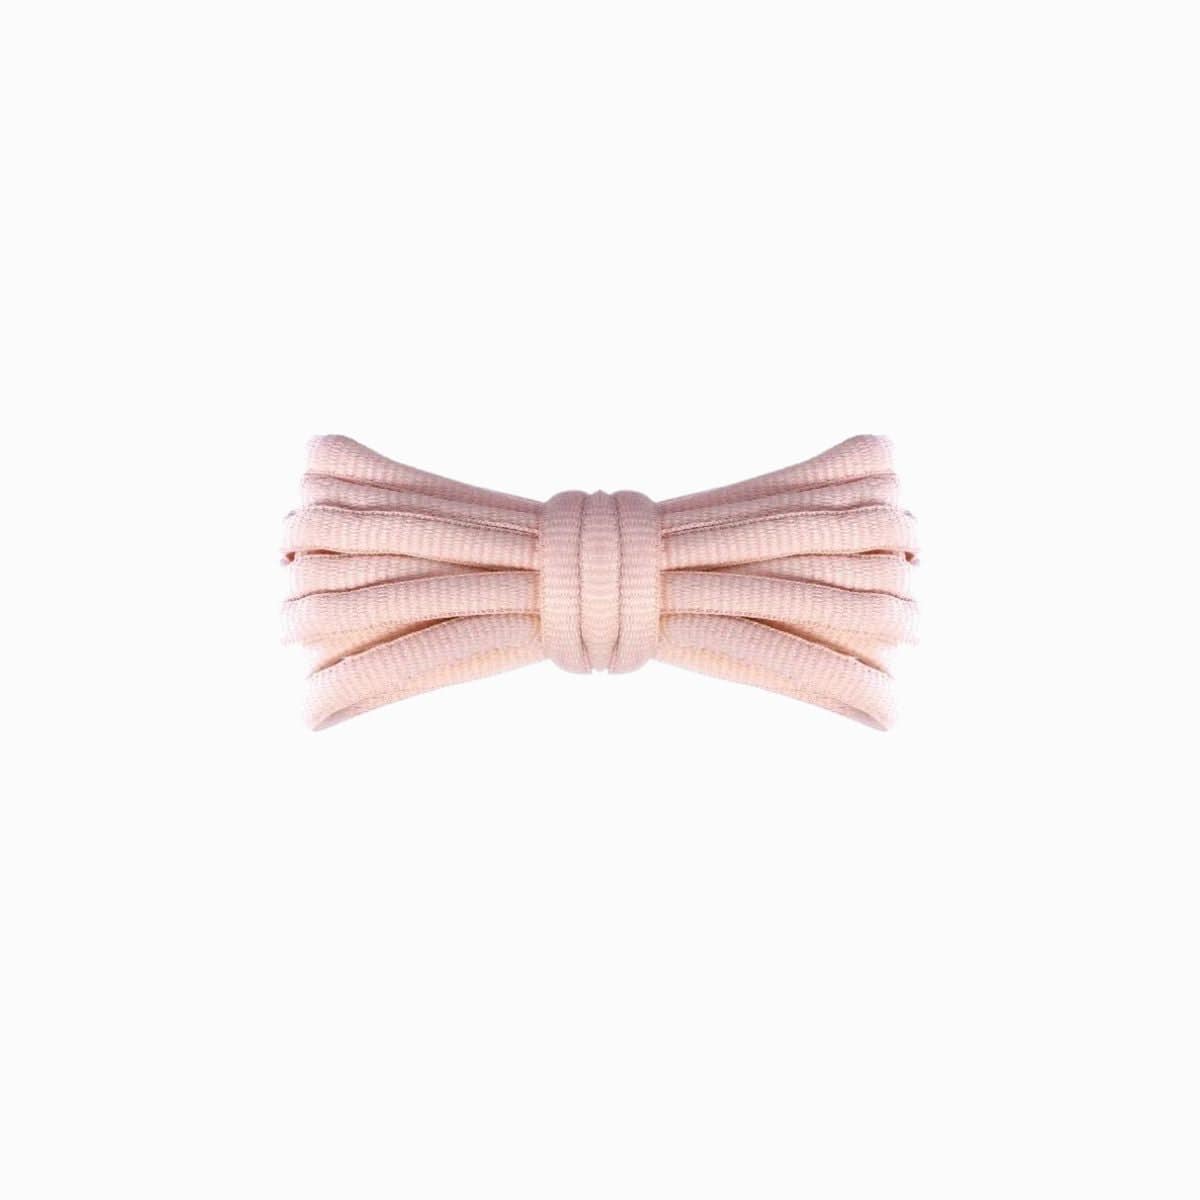 Light Pink Replacement Adidas Shoe Laces for Adidas Spezial Sneakers by Kicks Shoelaces